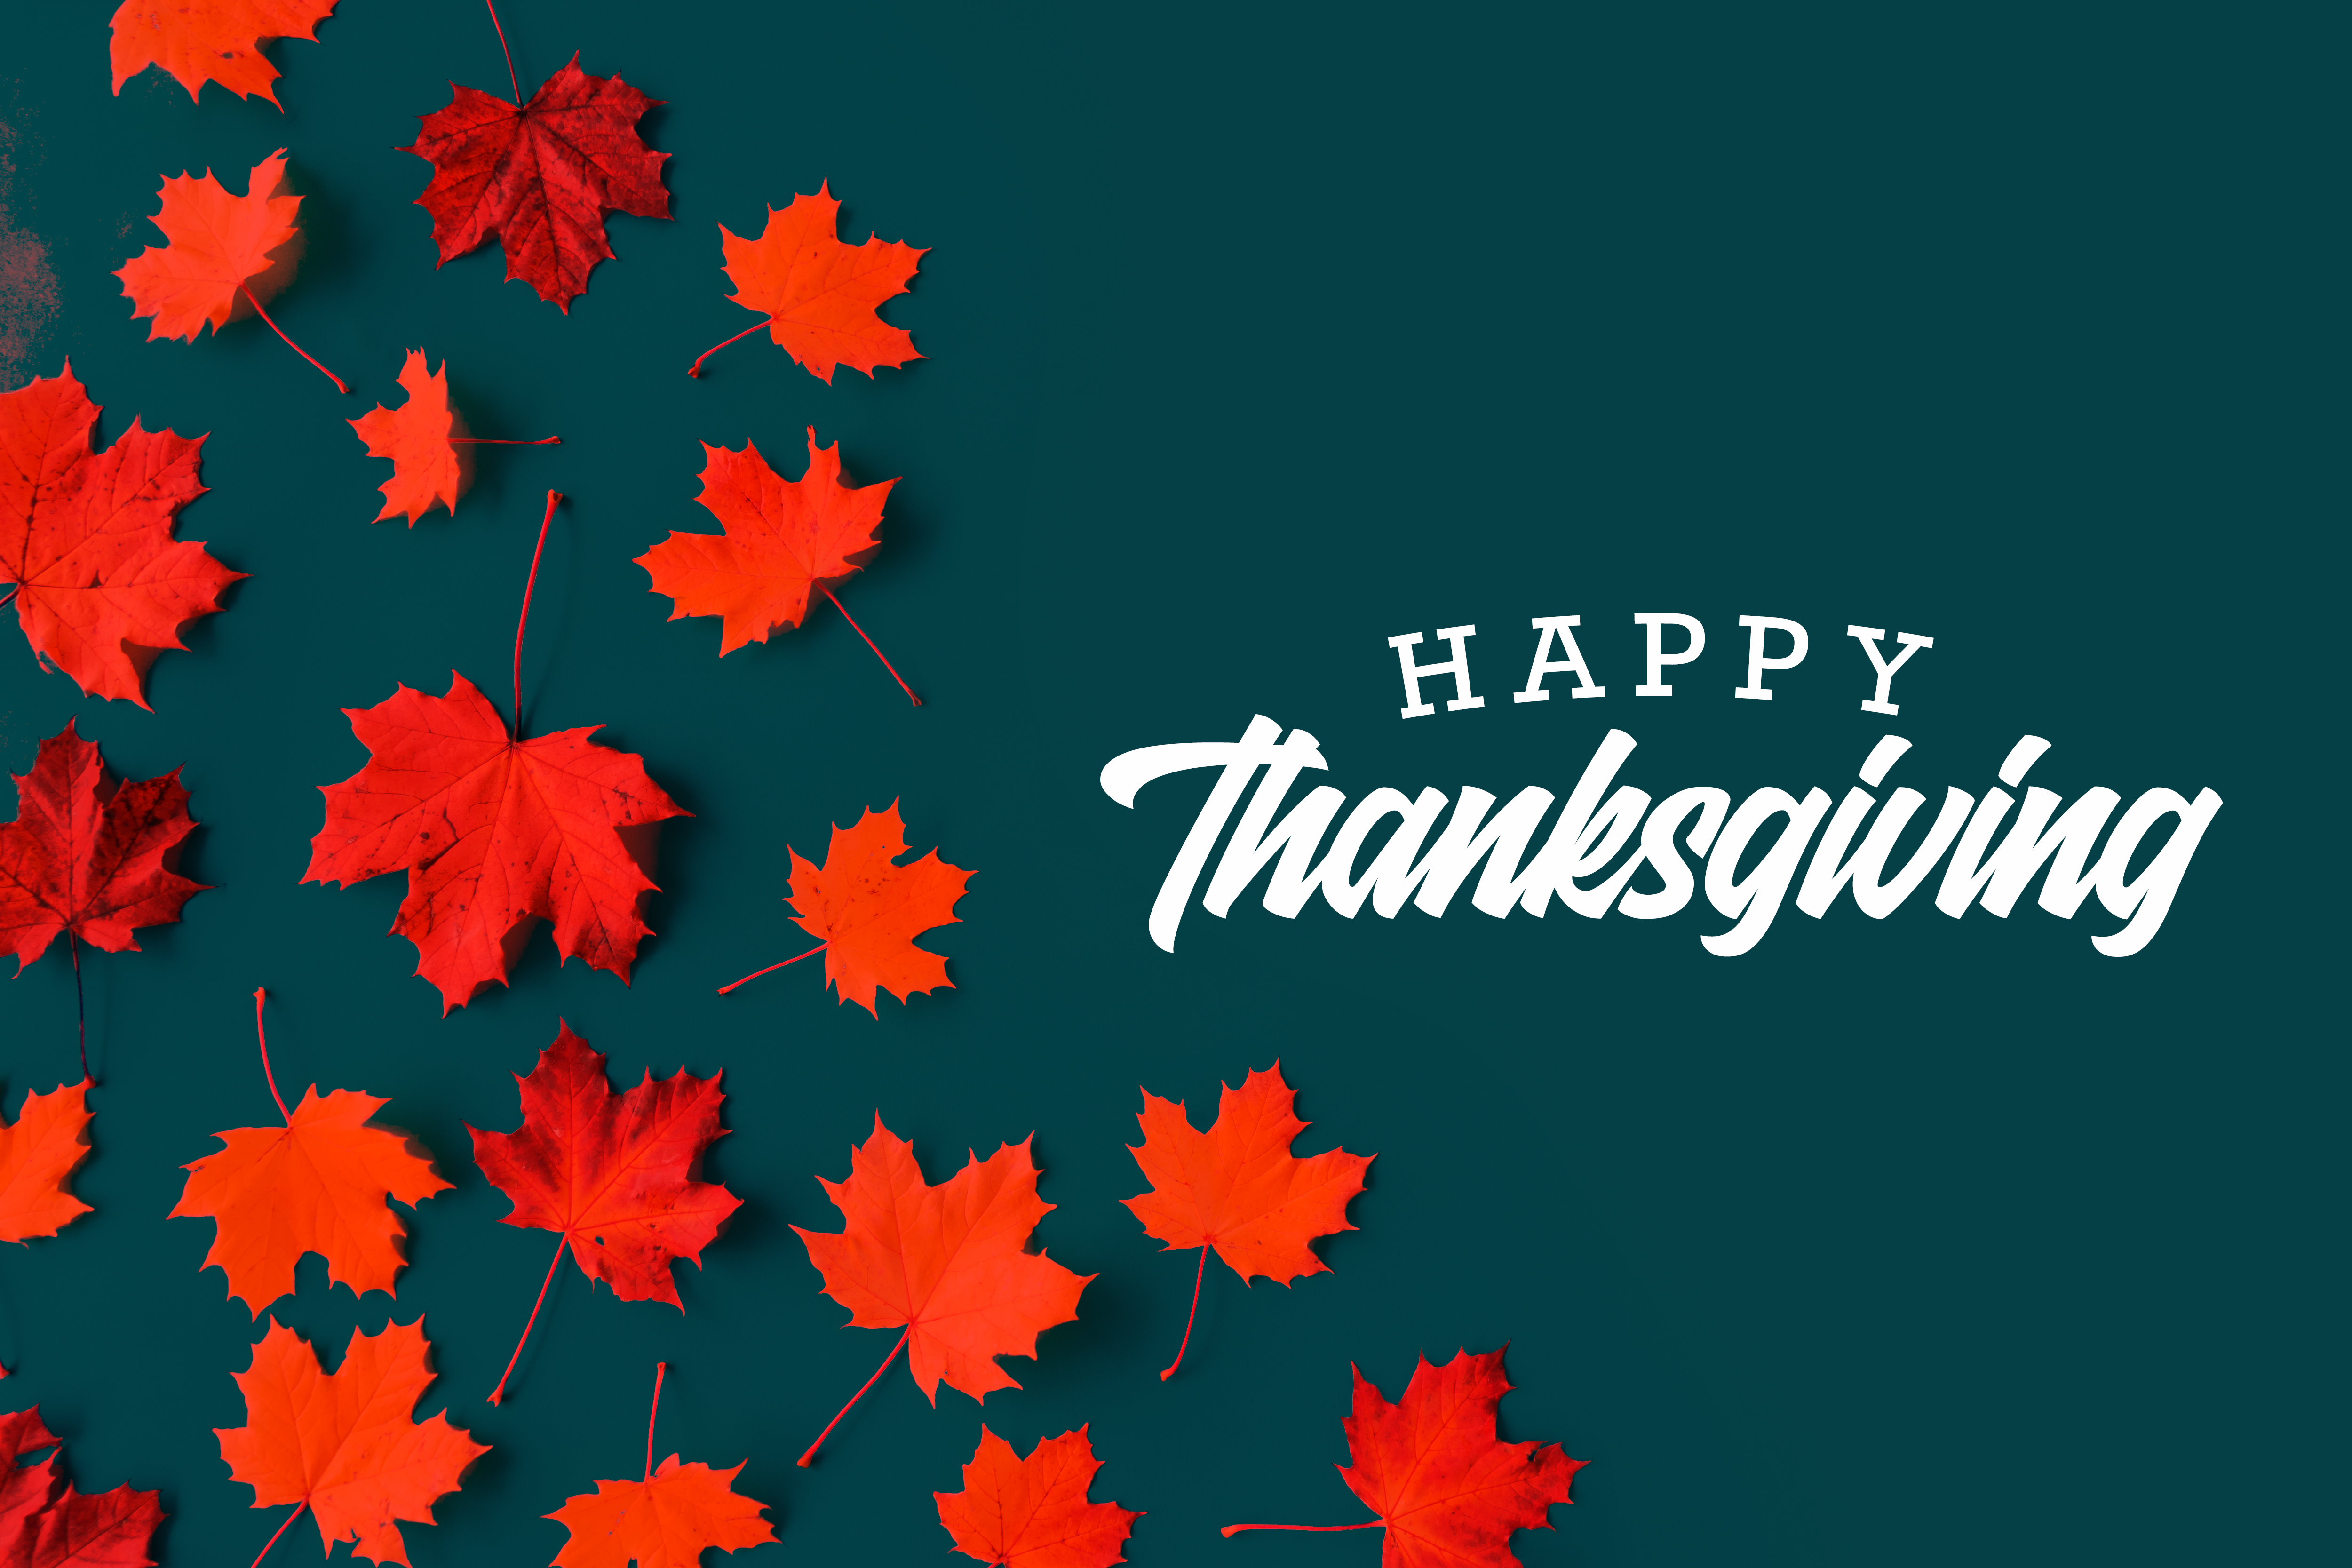 https://picjumbo.com/wp-content/uploads/happy-thanksgiving-lettering-with-fall-leaves-free-photo.jpg